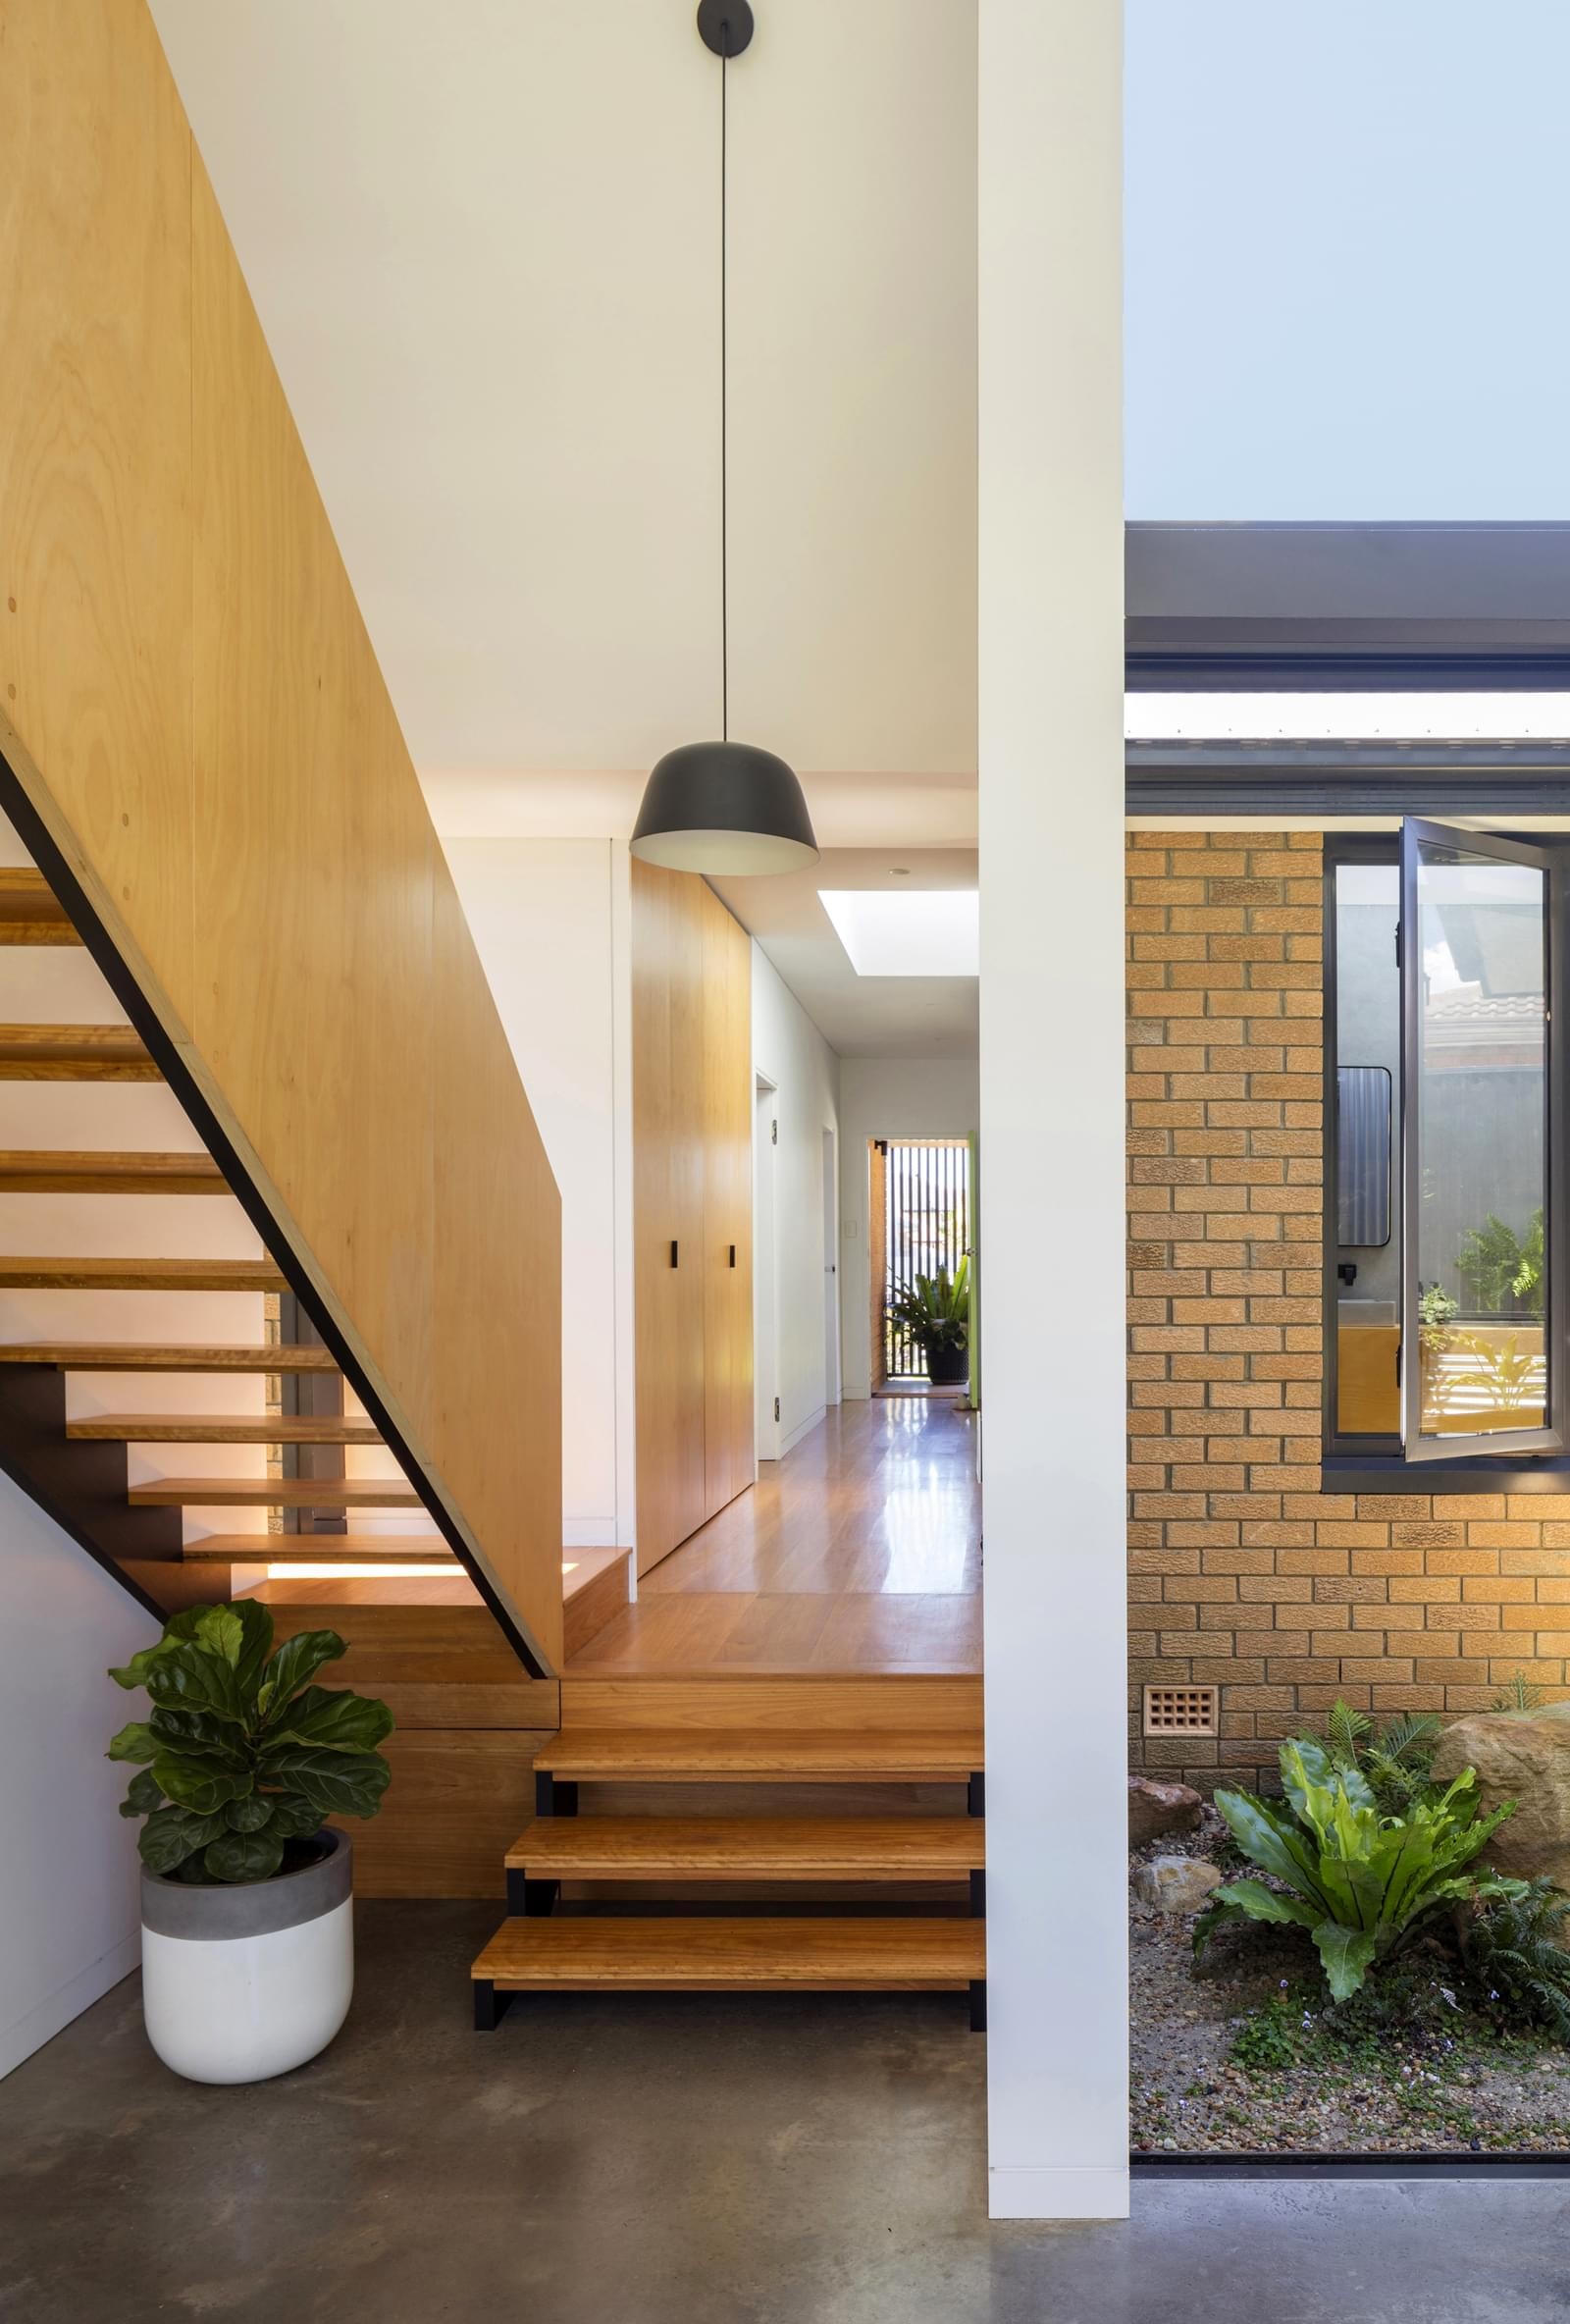 Expansion and modernization of an old bungalow in Australia